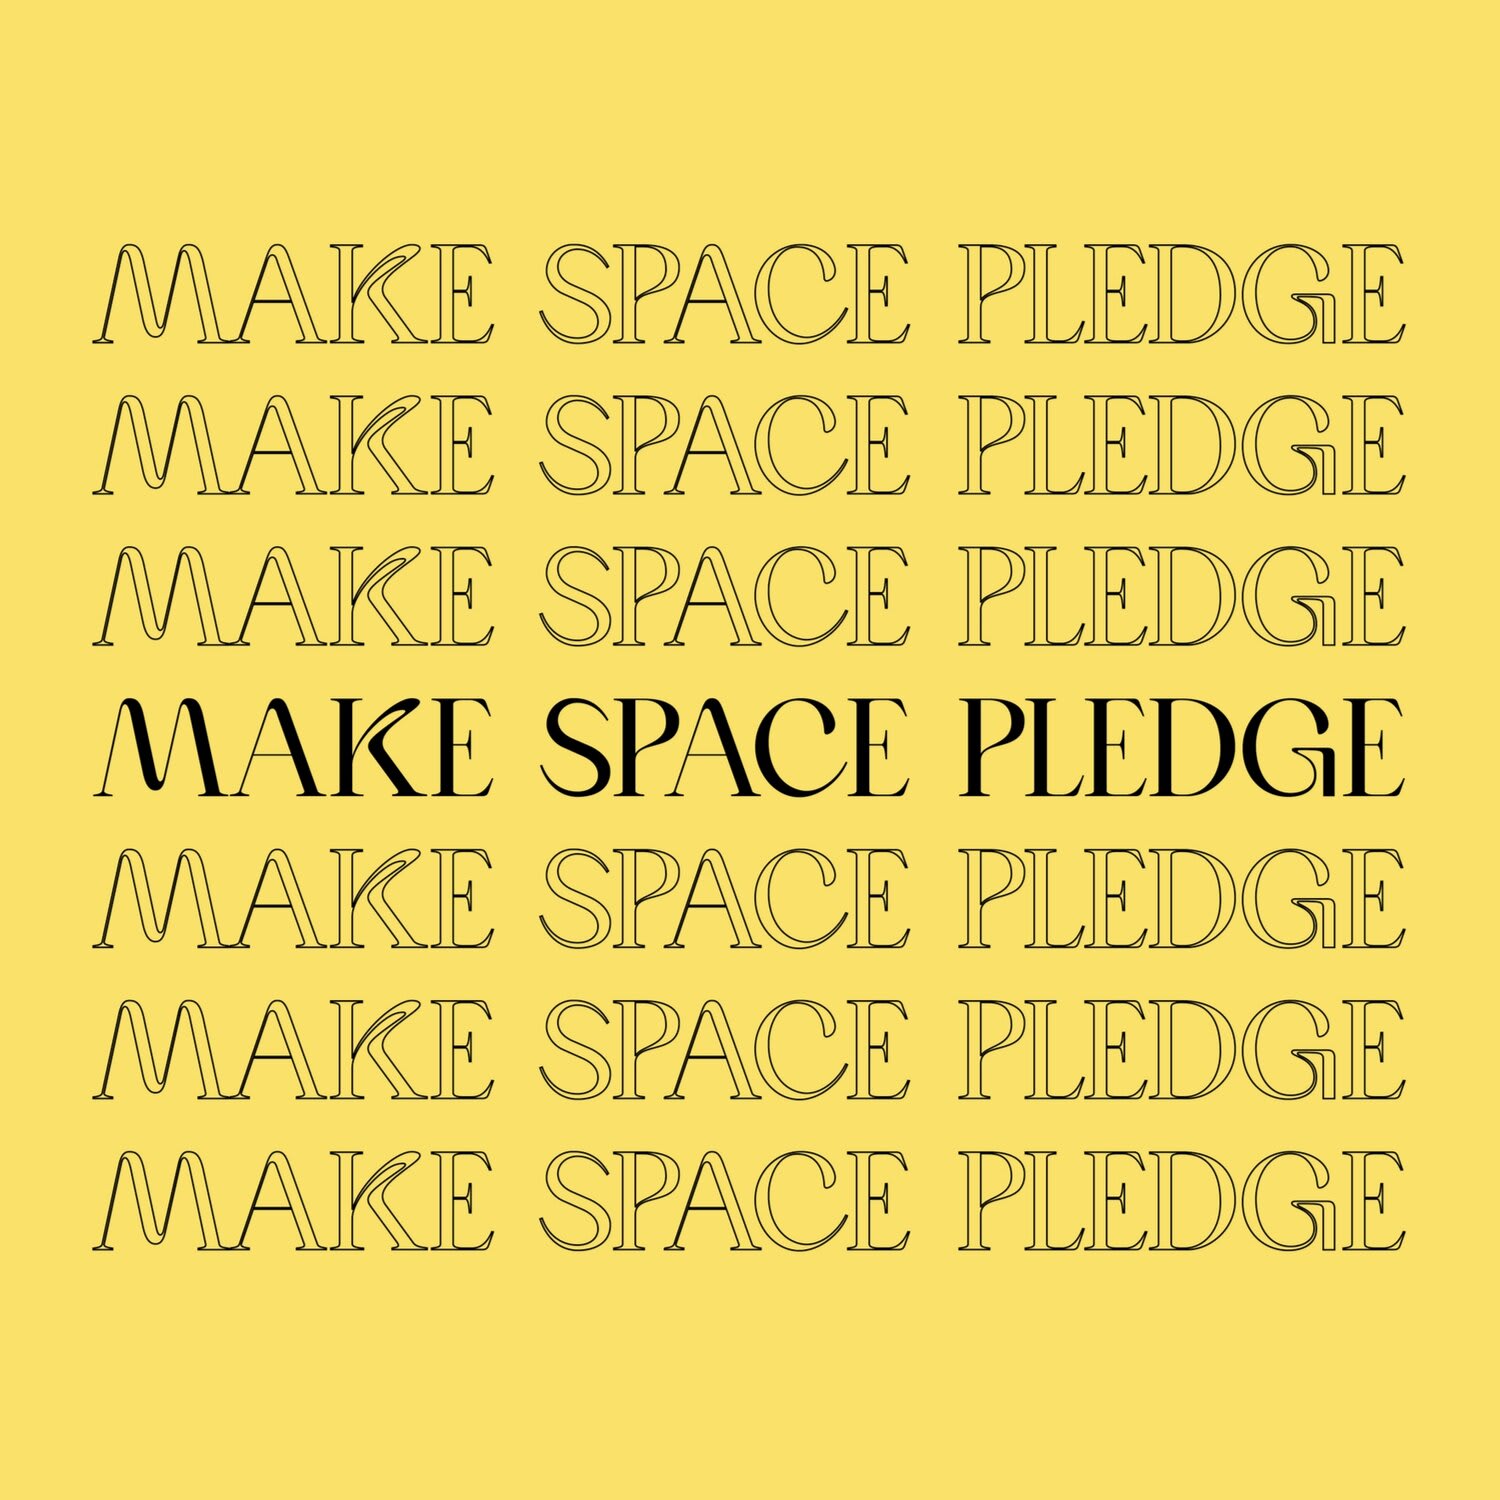 Join us for the #MakeSpacePledge